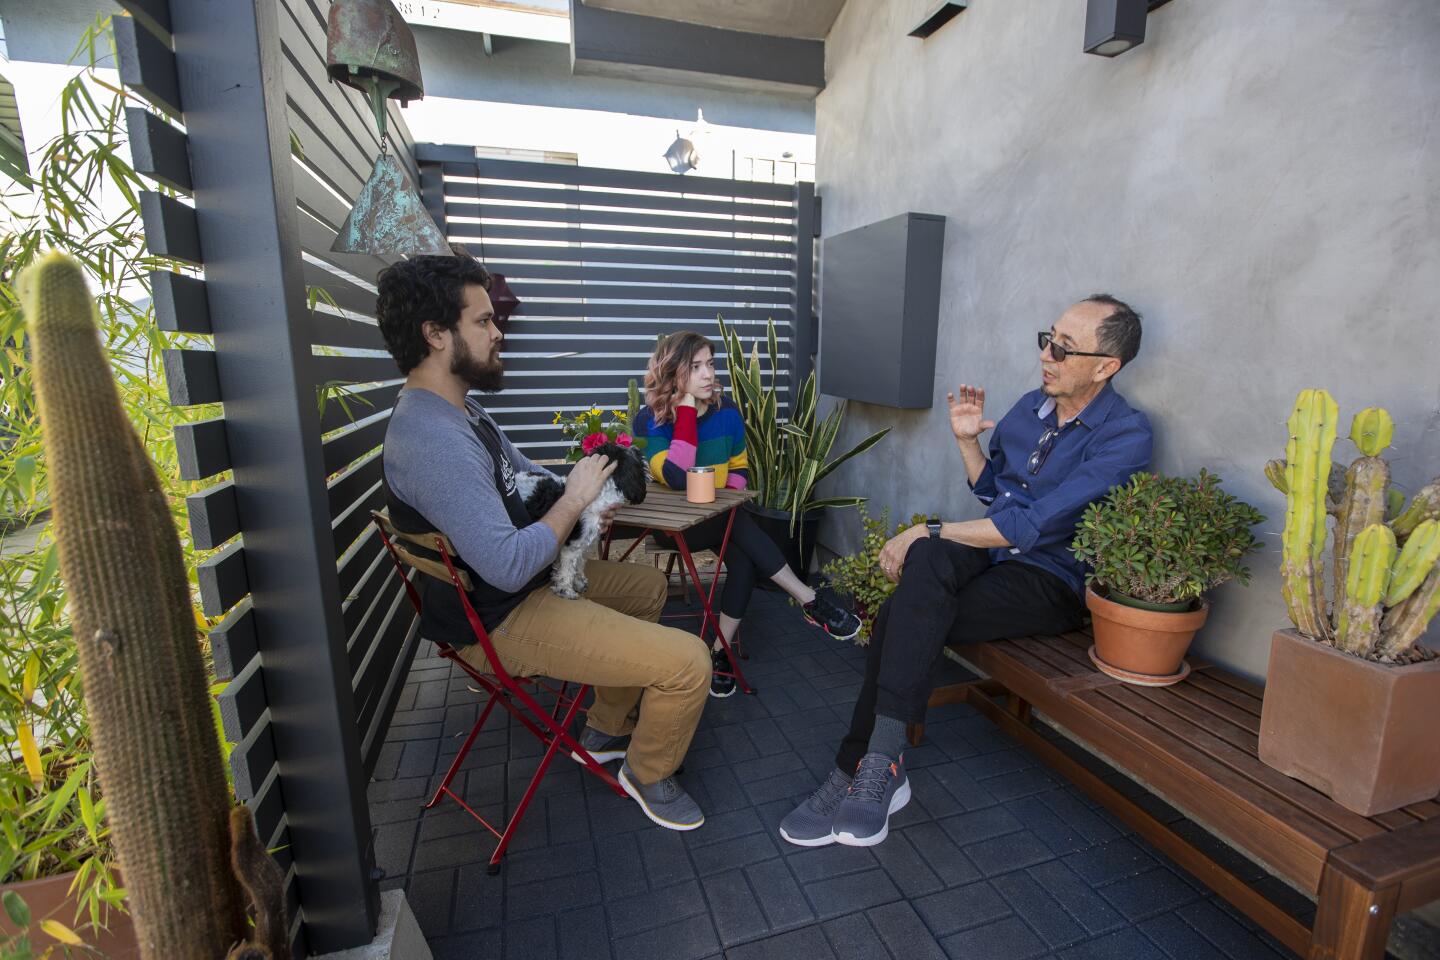 Two men and a woman sit in a small patio.